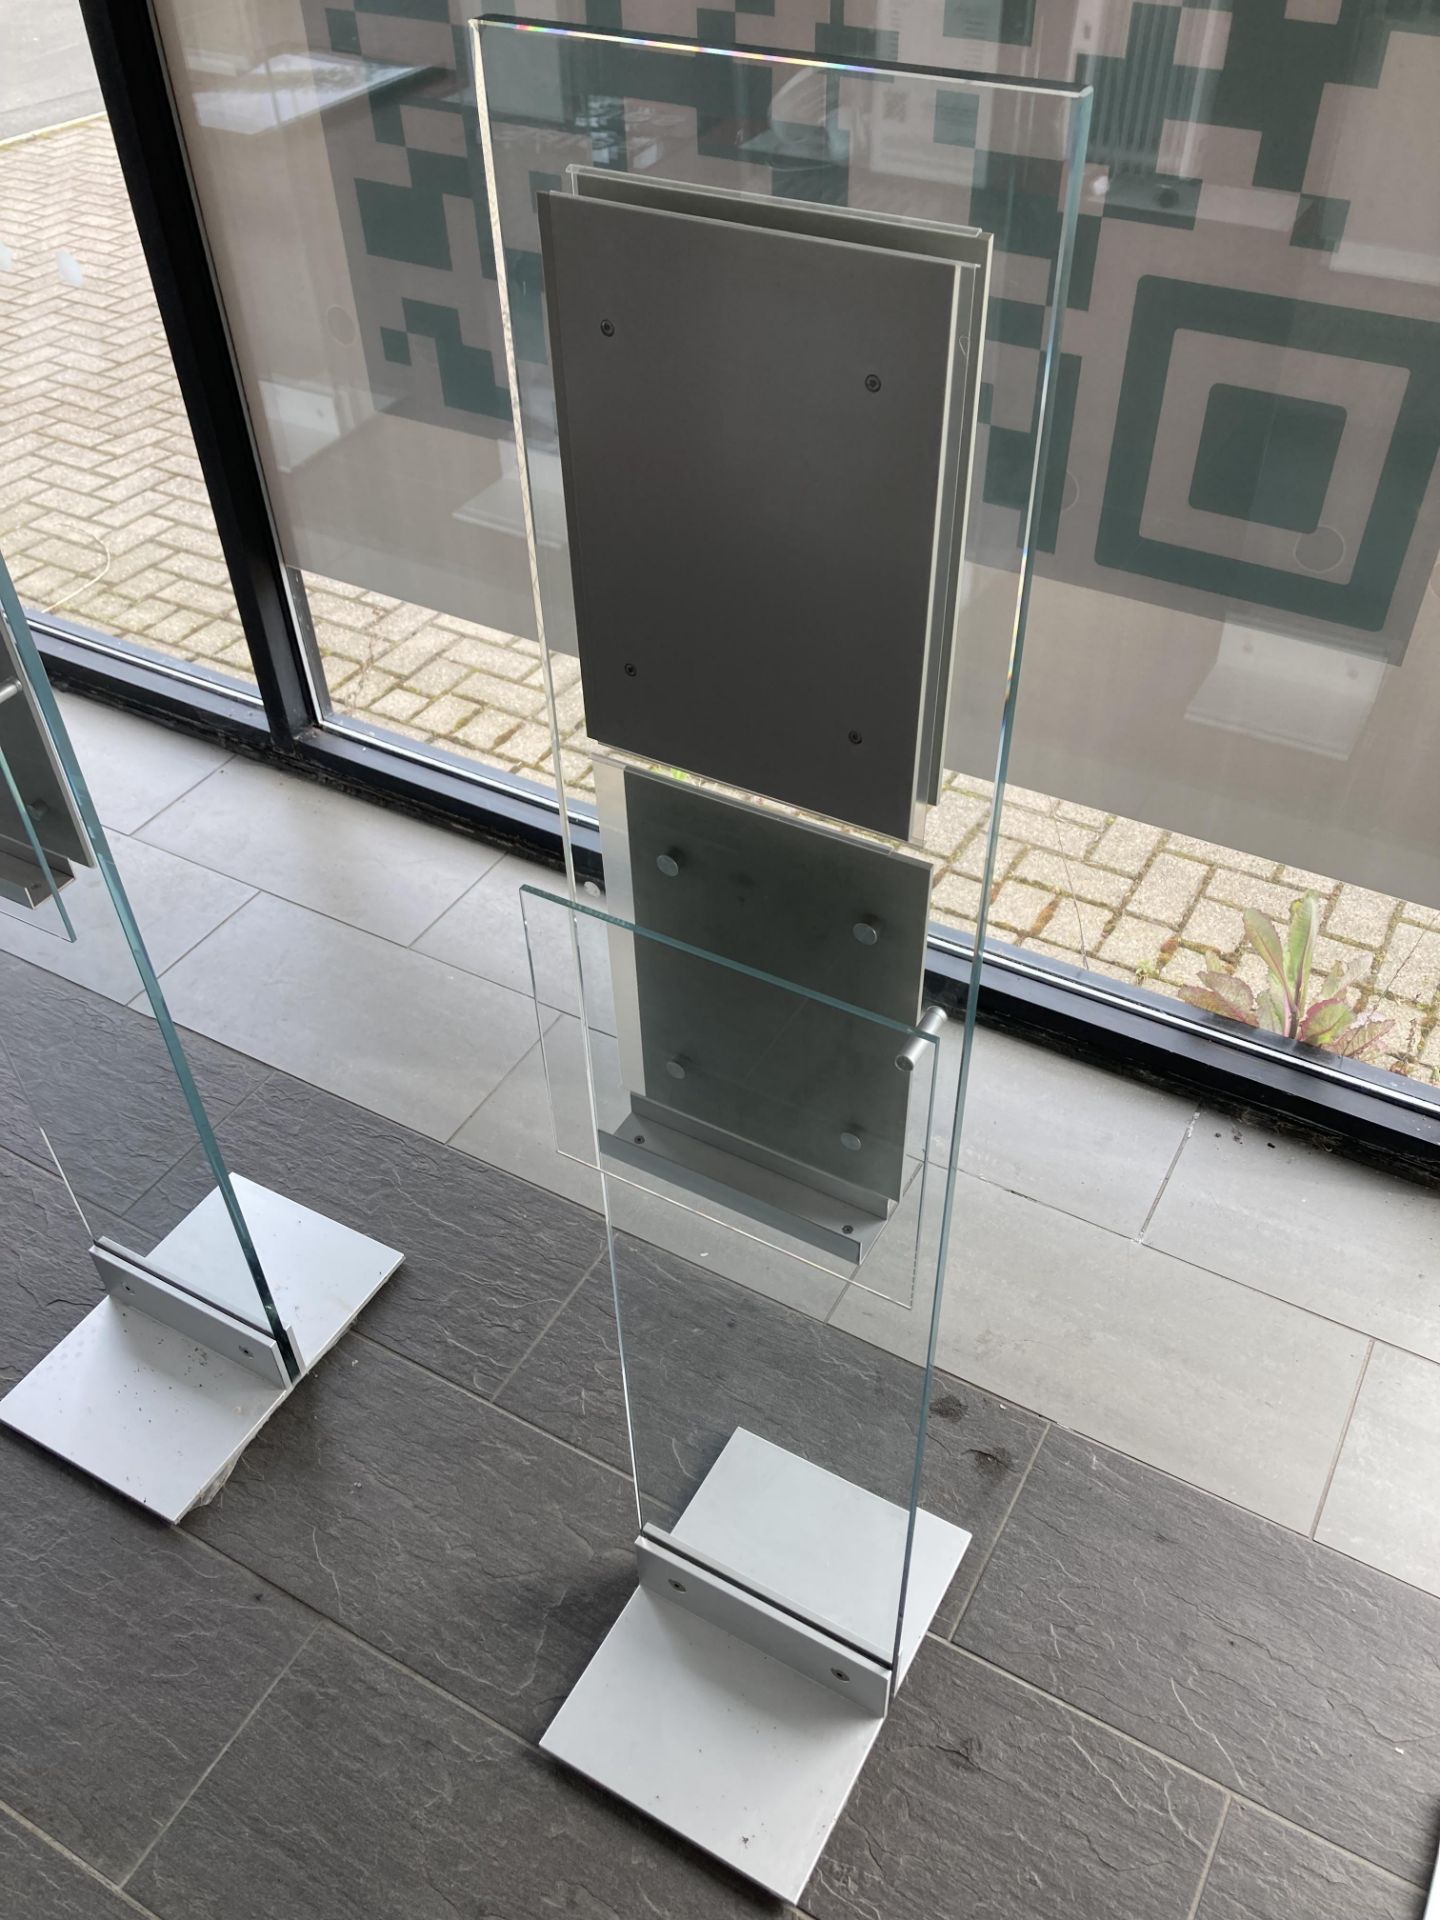 GLASS A4 DISPLAY UNIT - Image 2 of 2